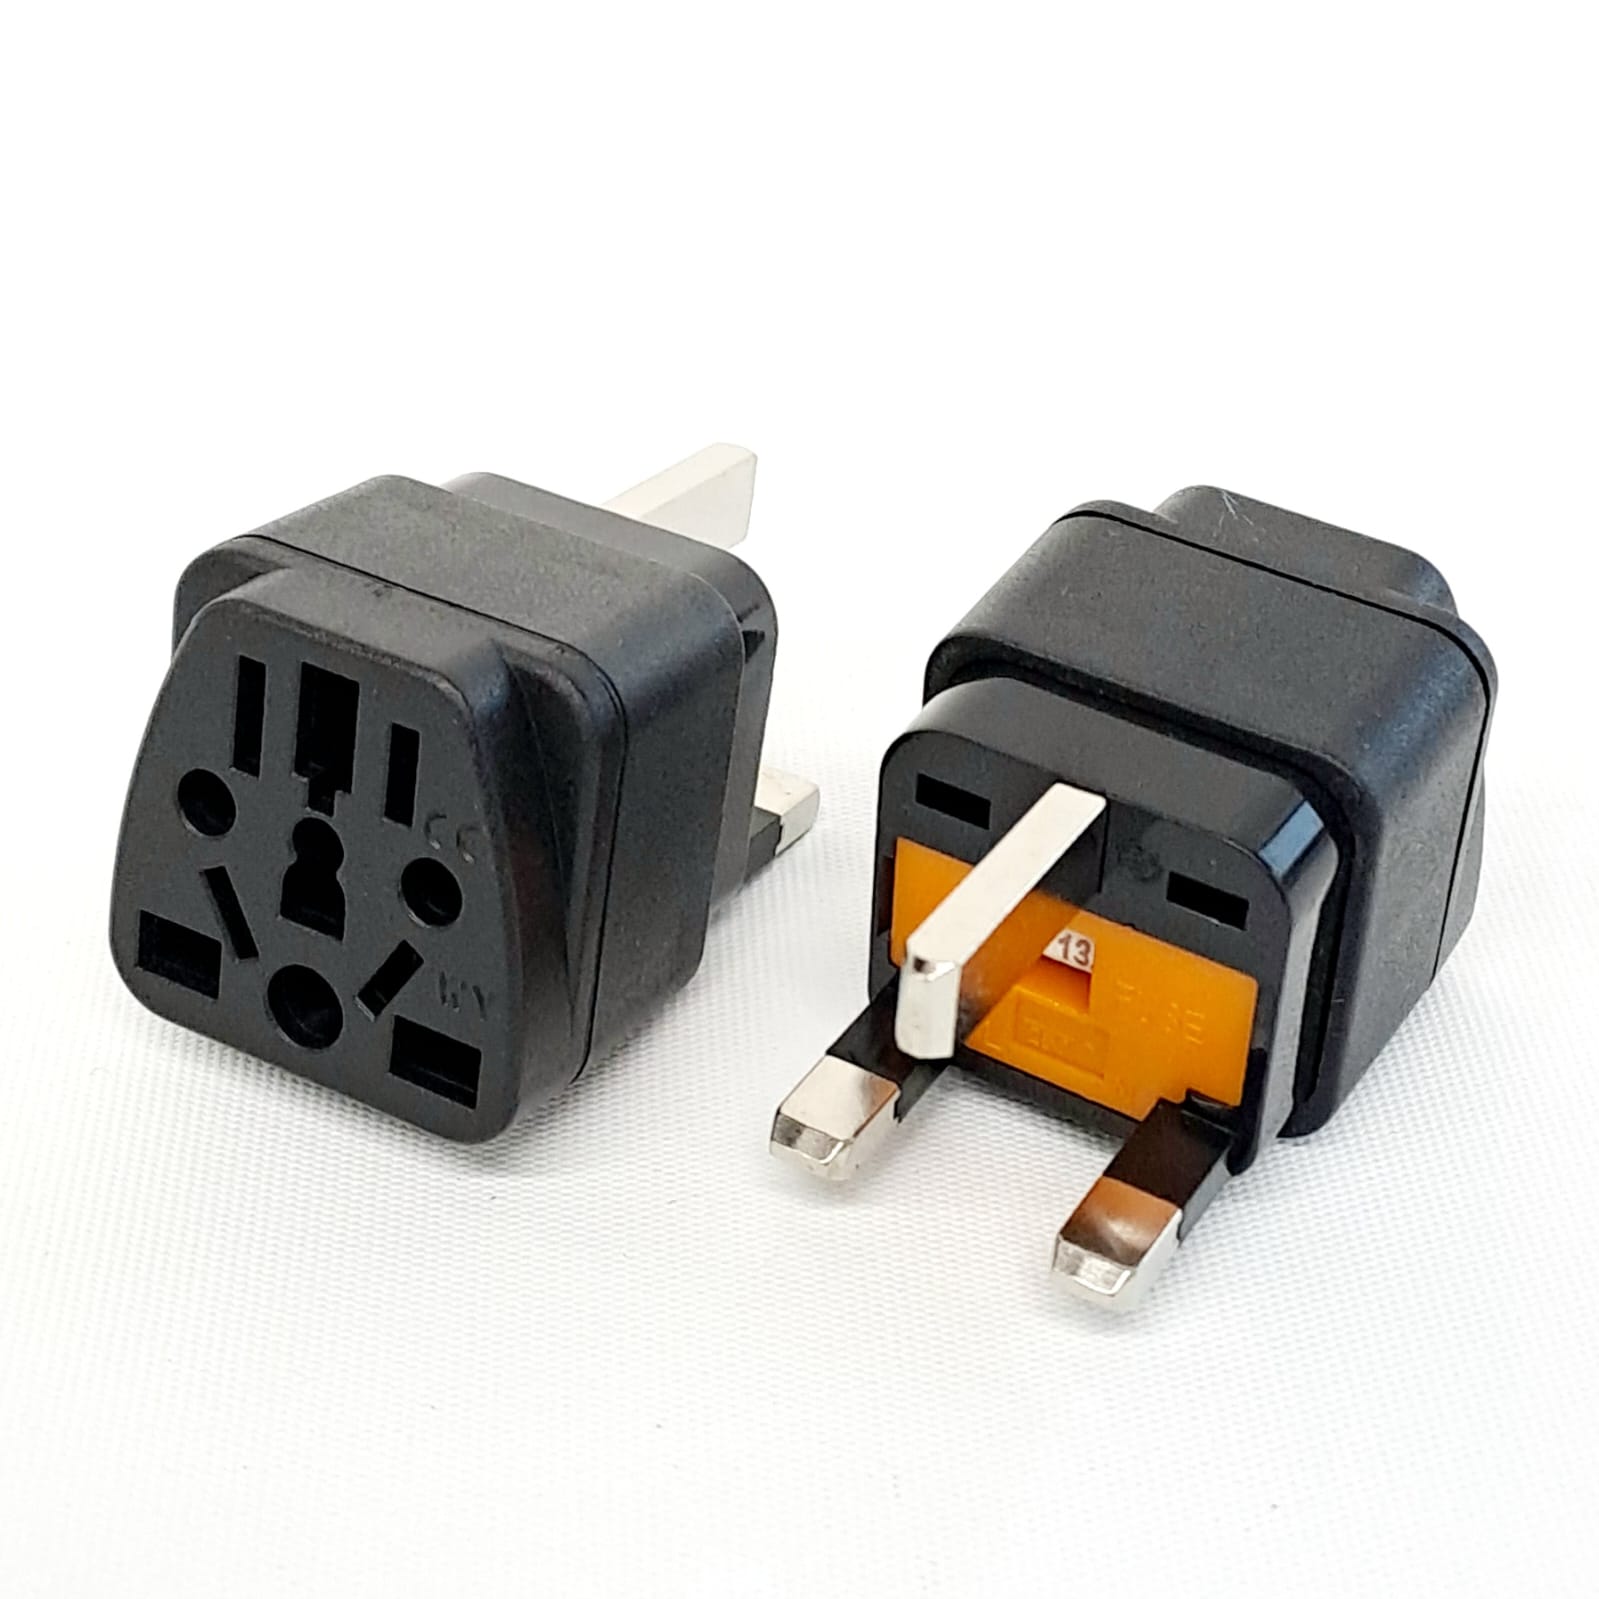 WY-7F BS1363 to Universal Jack Power Adaptor Black with Fuse (UK, HK, SG, MY)